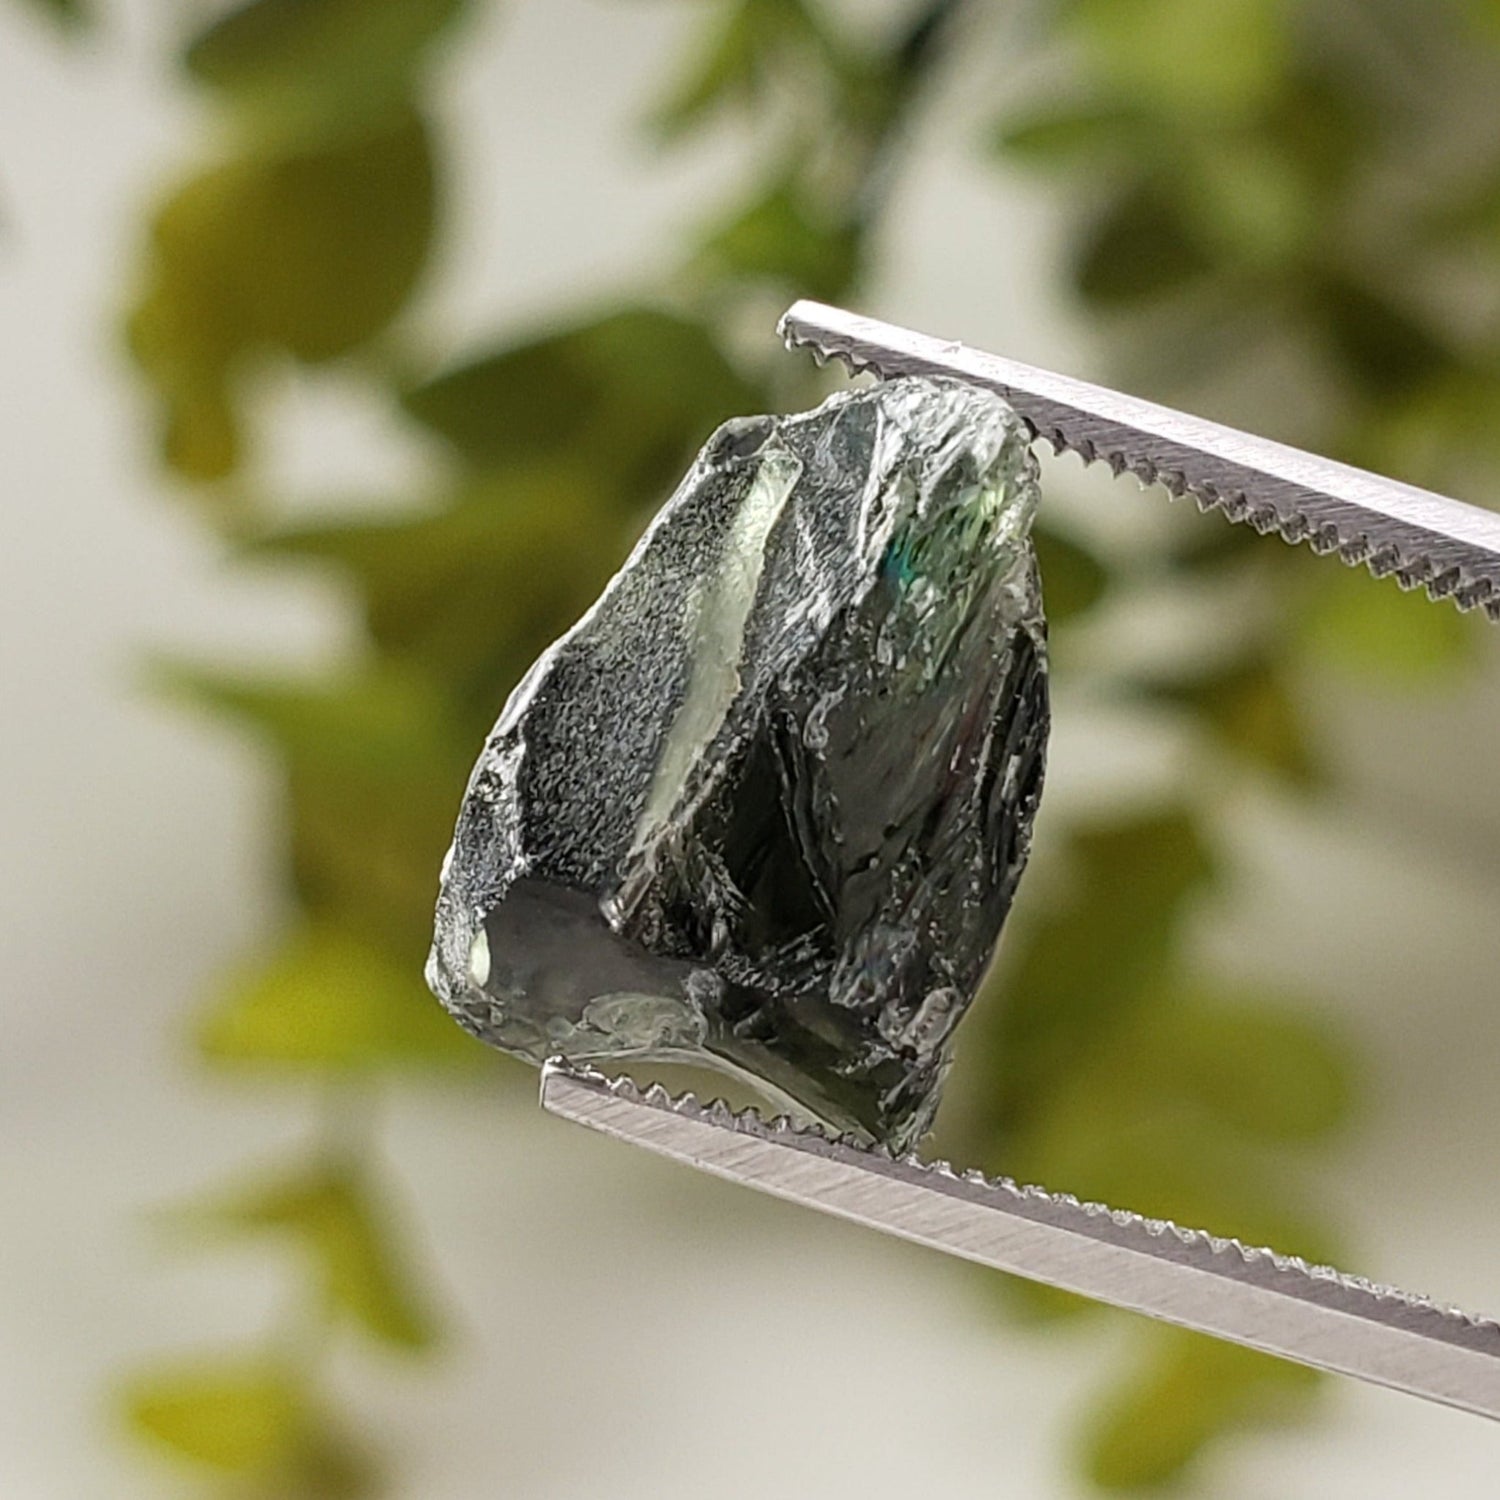 Chrome Diopside | Rough Crystal | Dark Green Mineral | 6.4ct | Africa